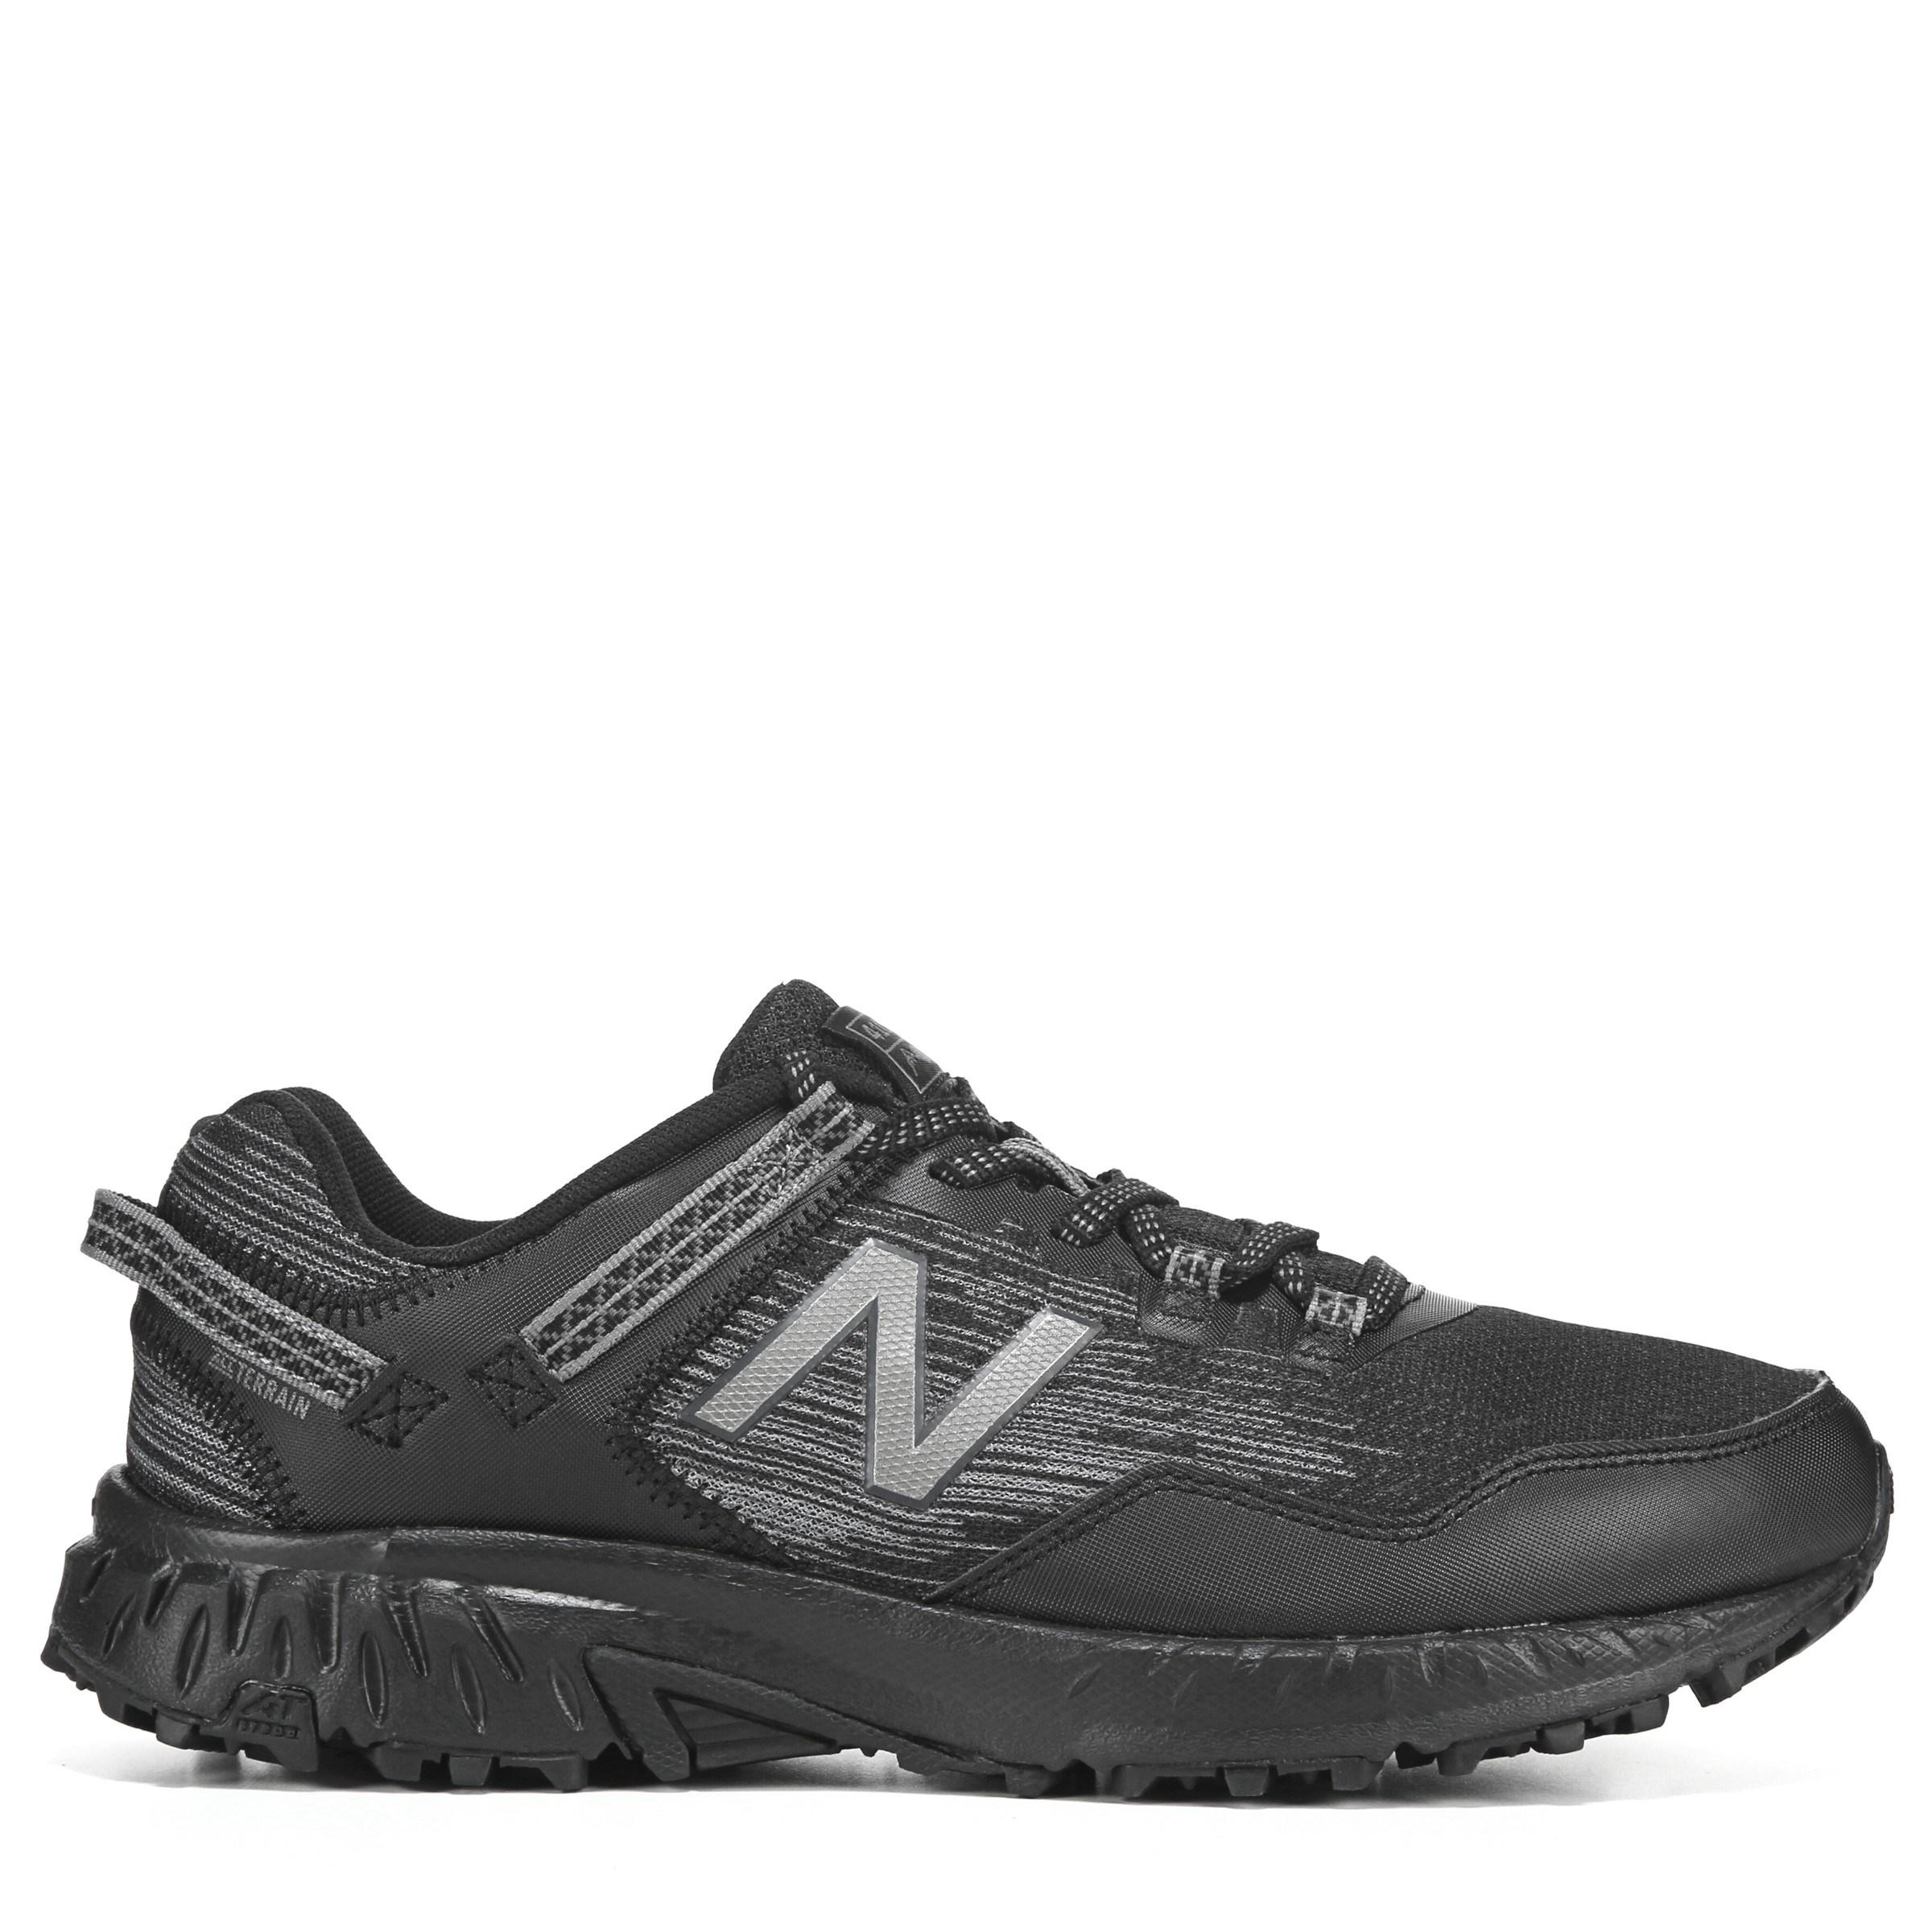 New Balance Synthetic 410 V6 Wide Trail Running Shoes in Black/Grey ...